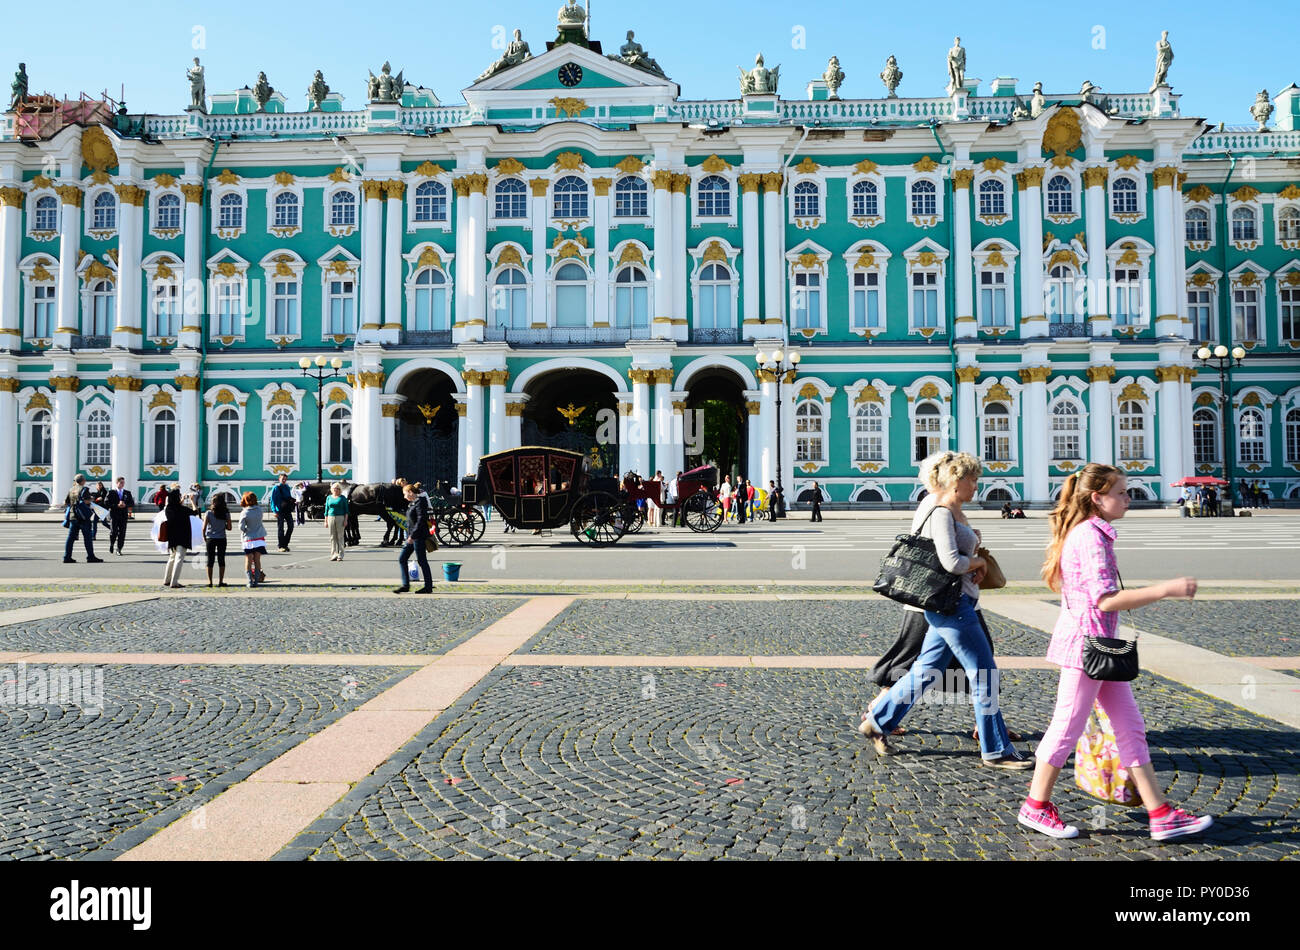 The Winter Palace facade. The Winter Palace was the official residence of the Russian monarchs. Today, the restored palace forms part of a complex of  Stock Photo